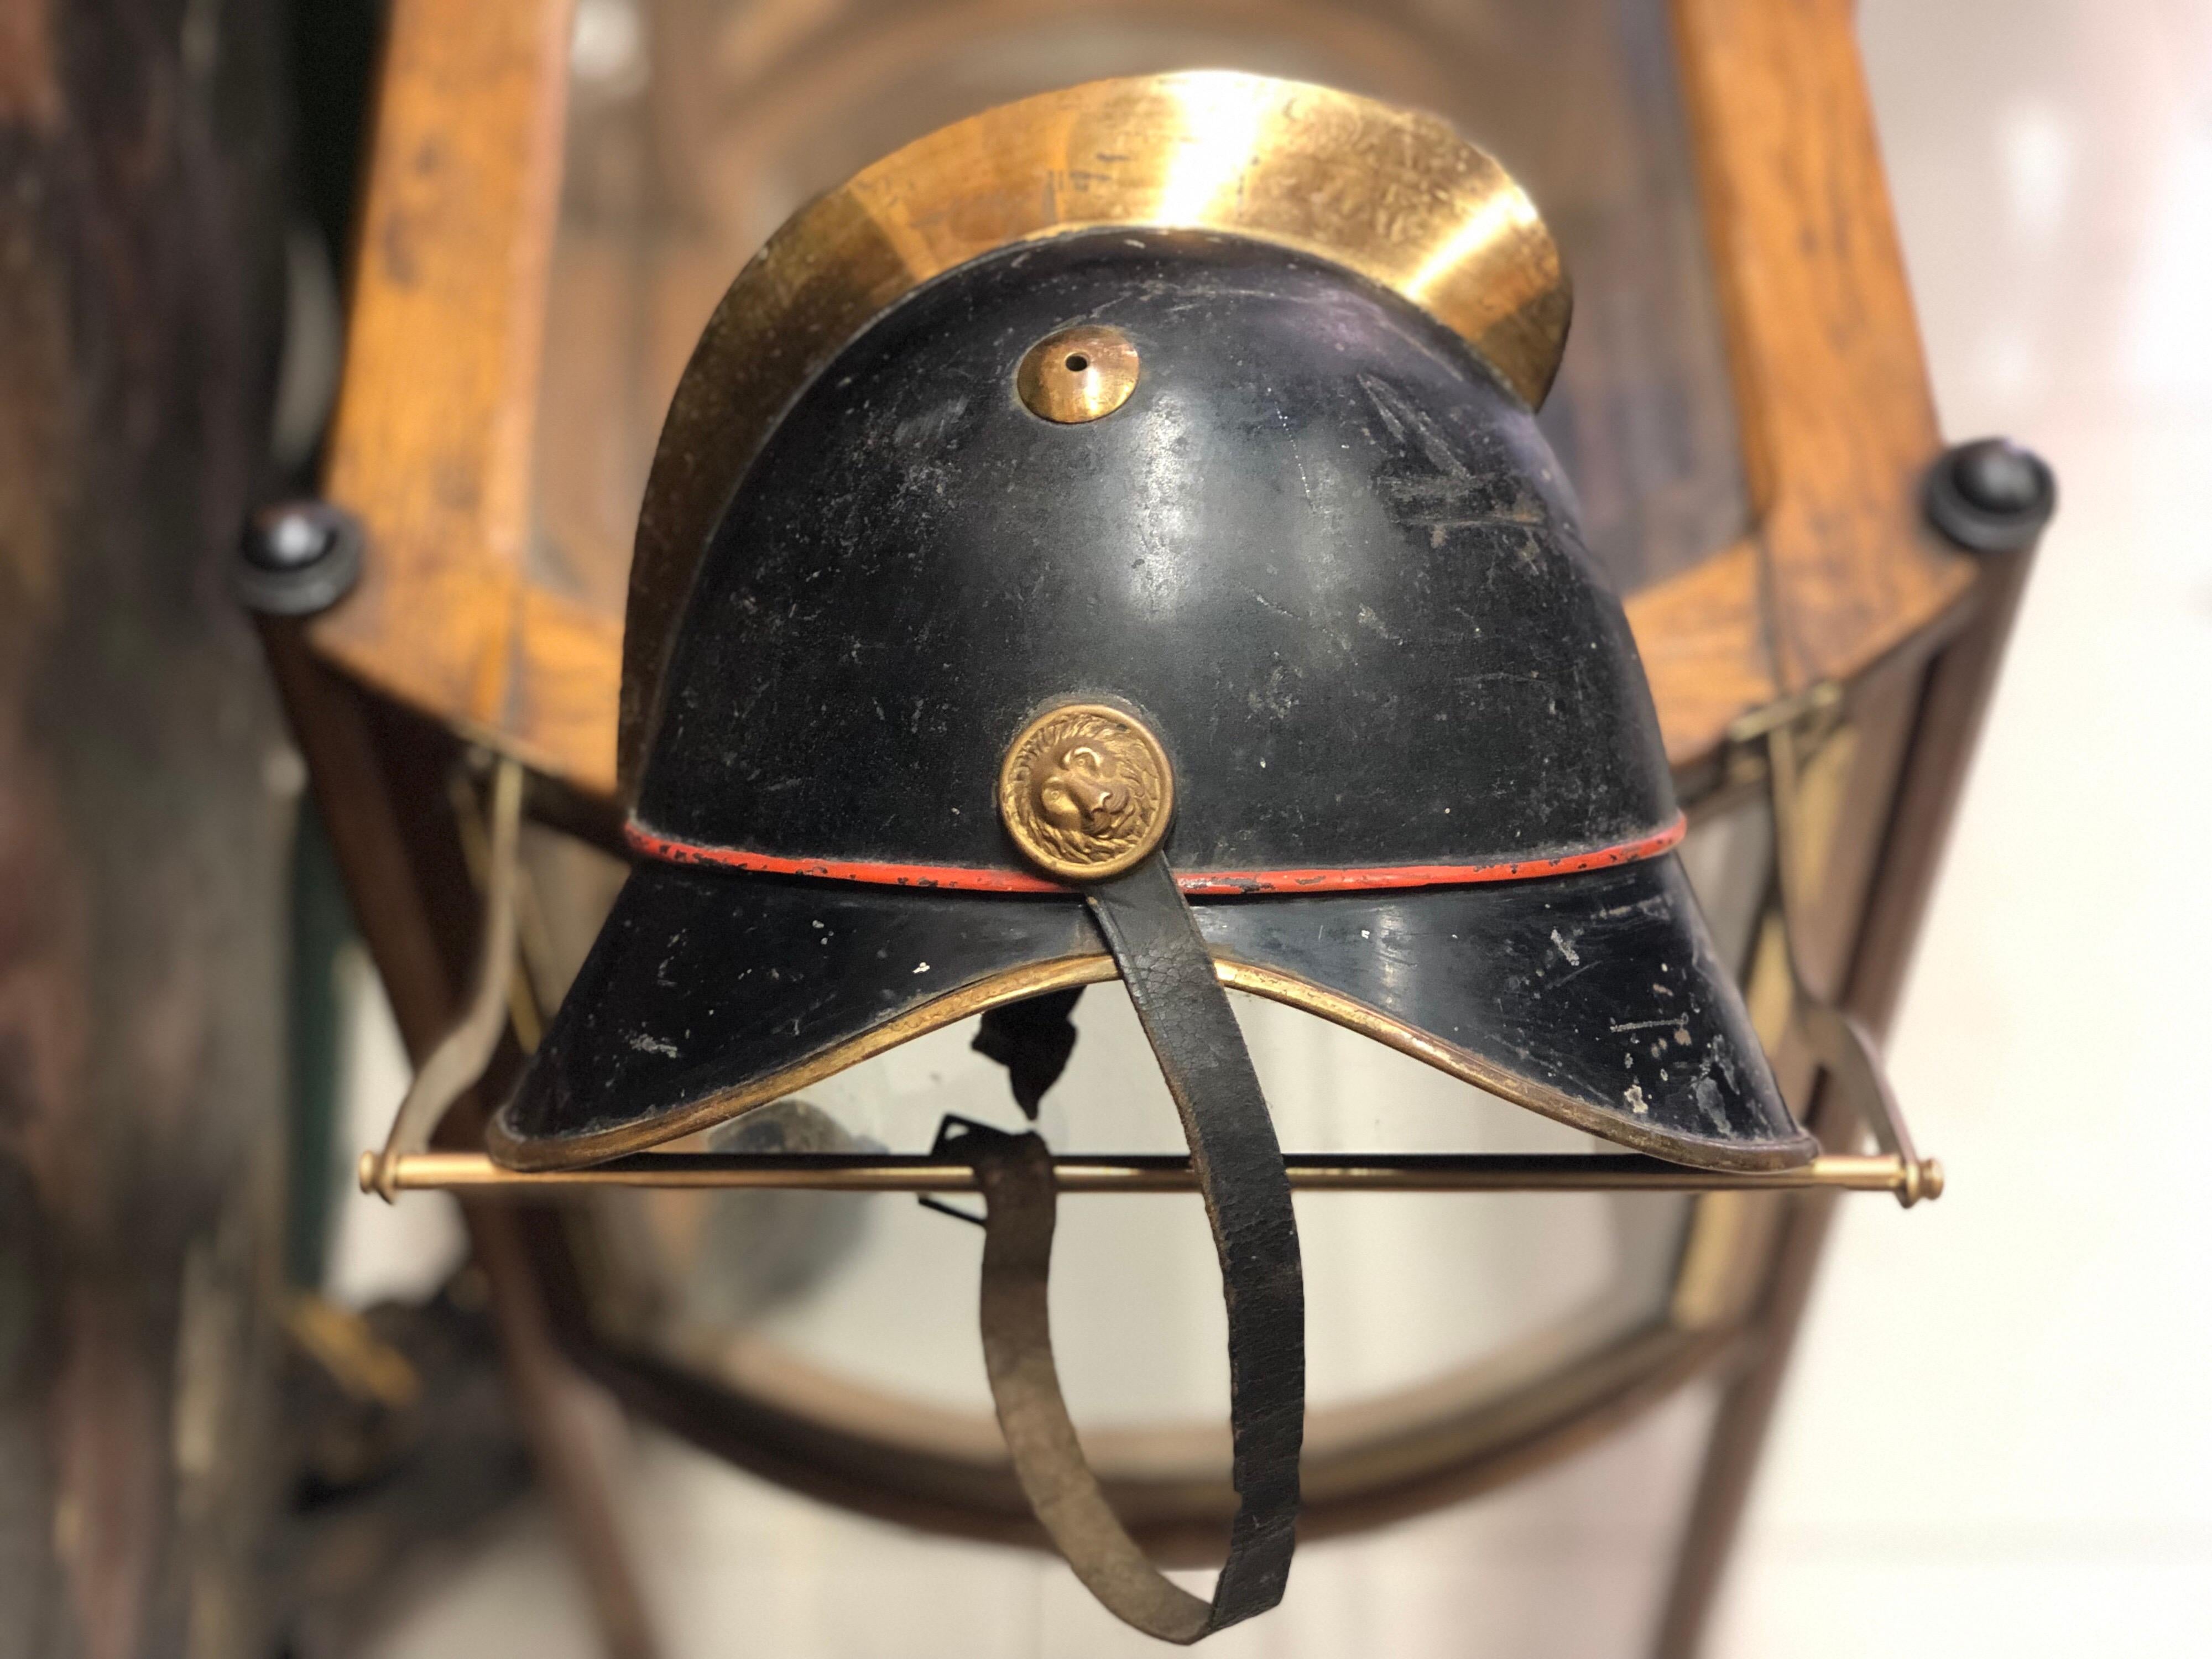 French black brass fireman's helmet with leather adjustable inside part.
Late 19th century.